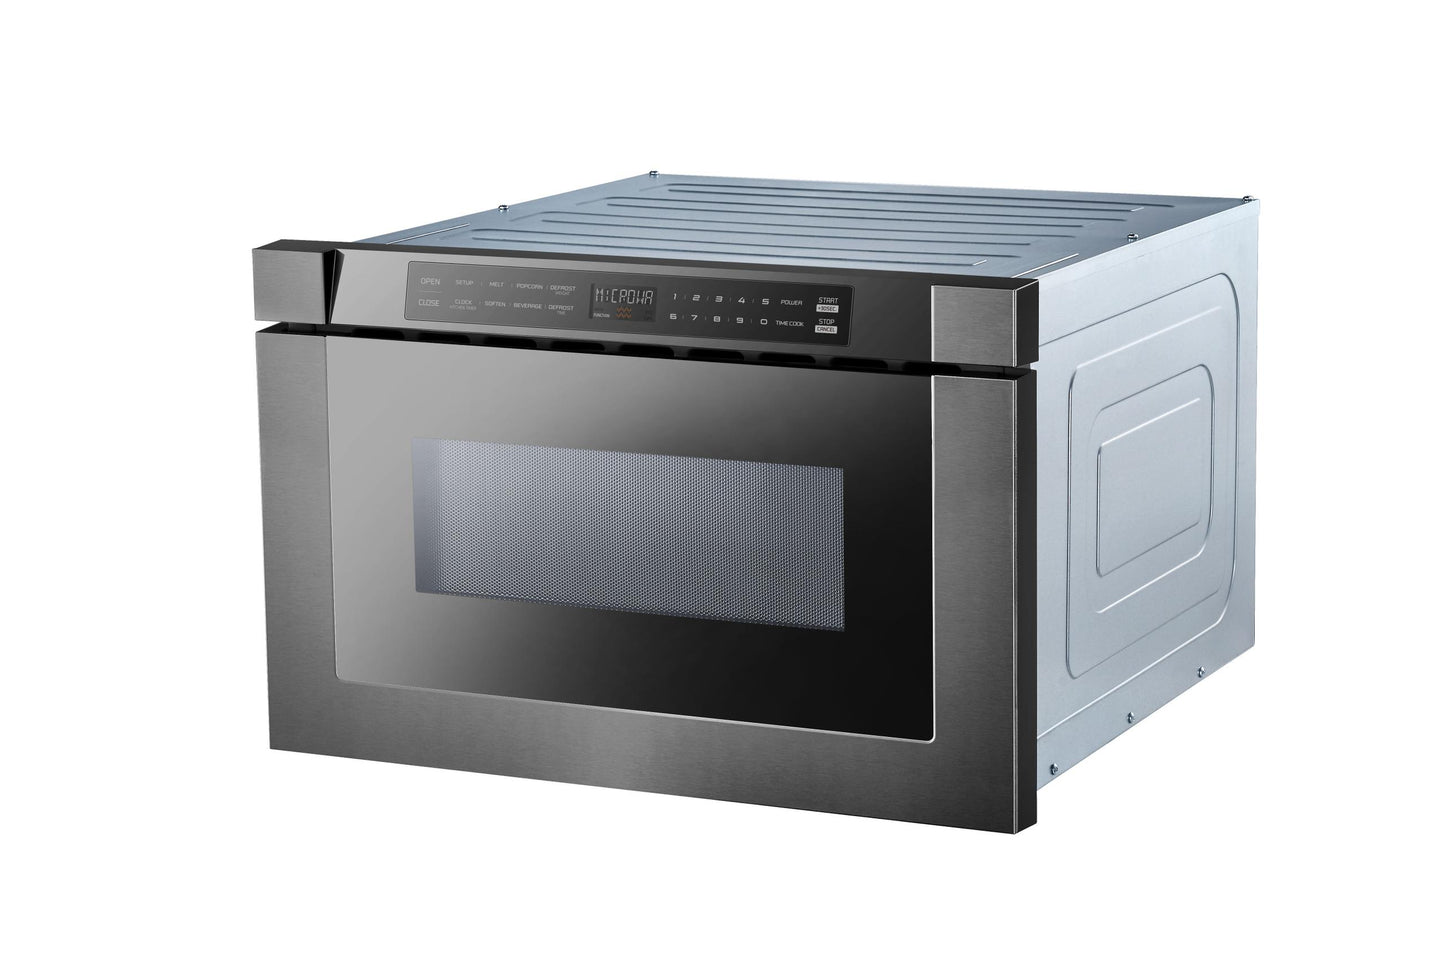 Xo Appliance XOMWD24BS 24" Built-In Microwave Drawer - Black Glass & Black Stainless